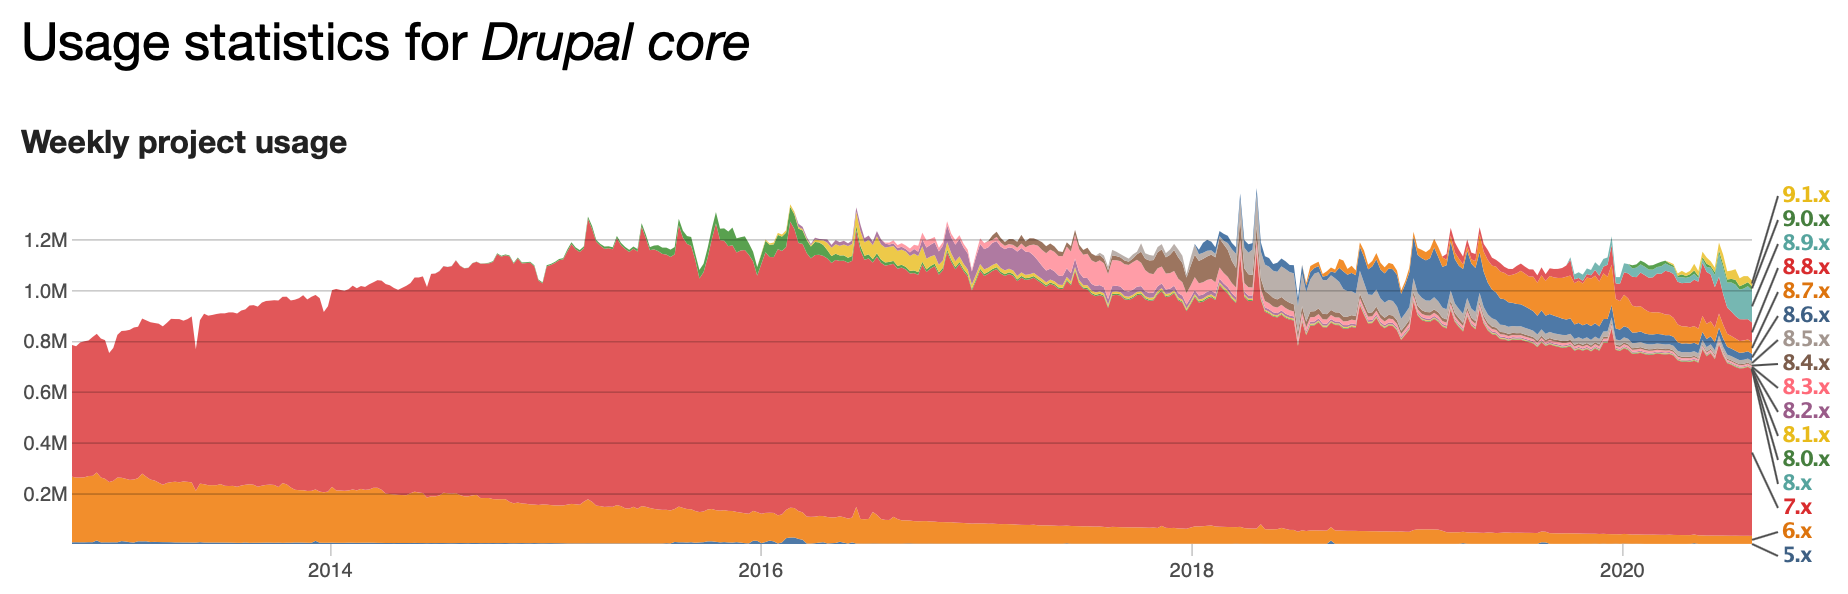 Usage Statistics for Drupal Core from 2013 to 2020